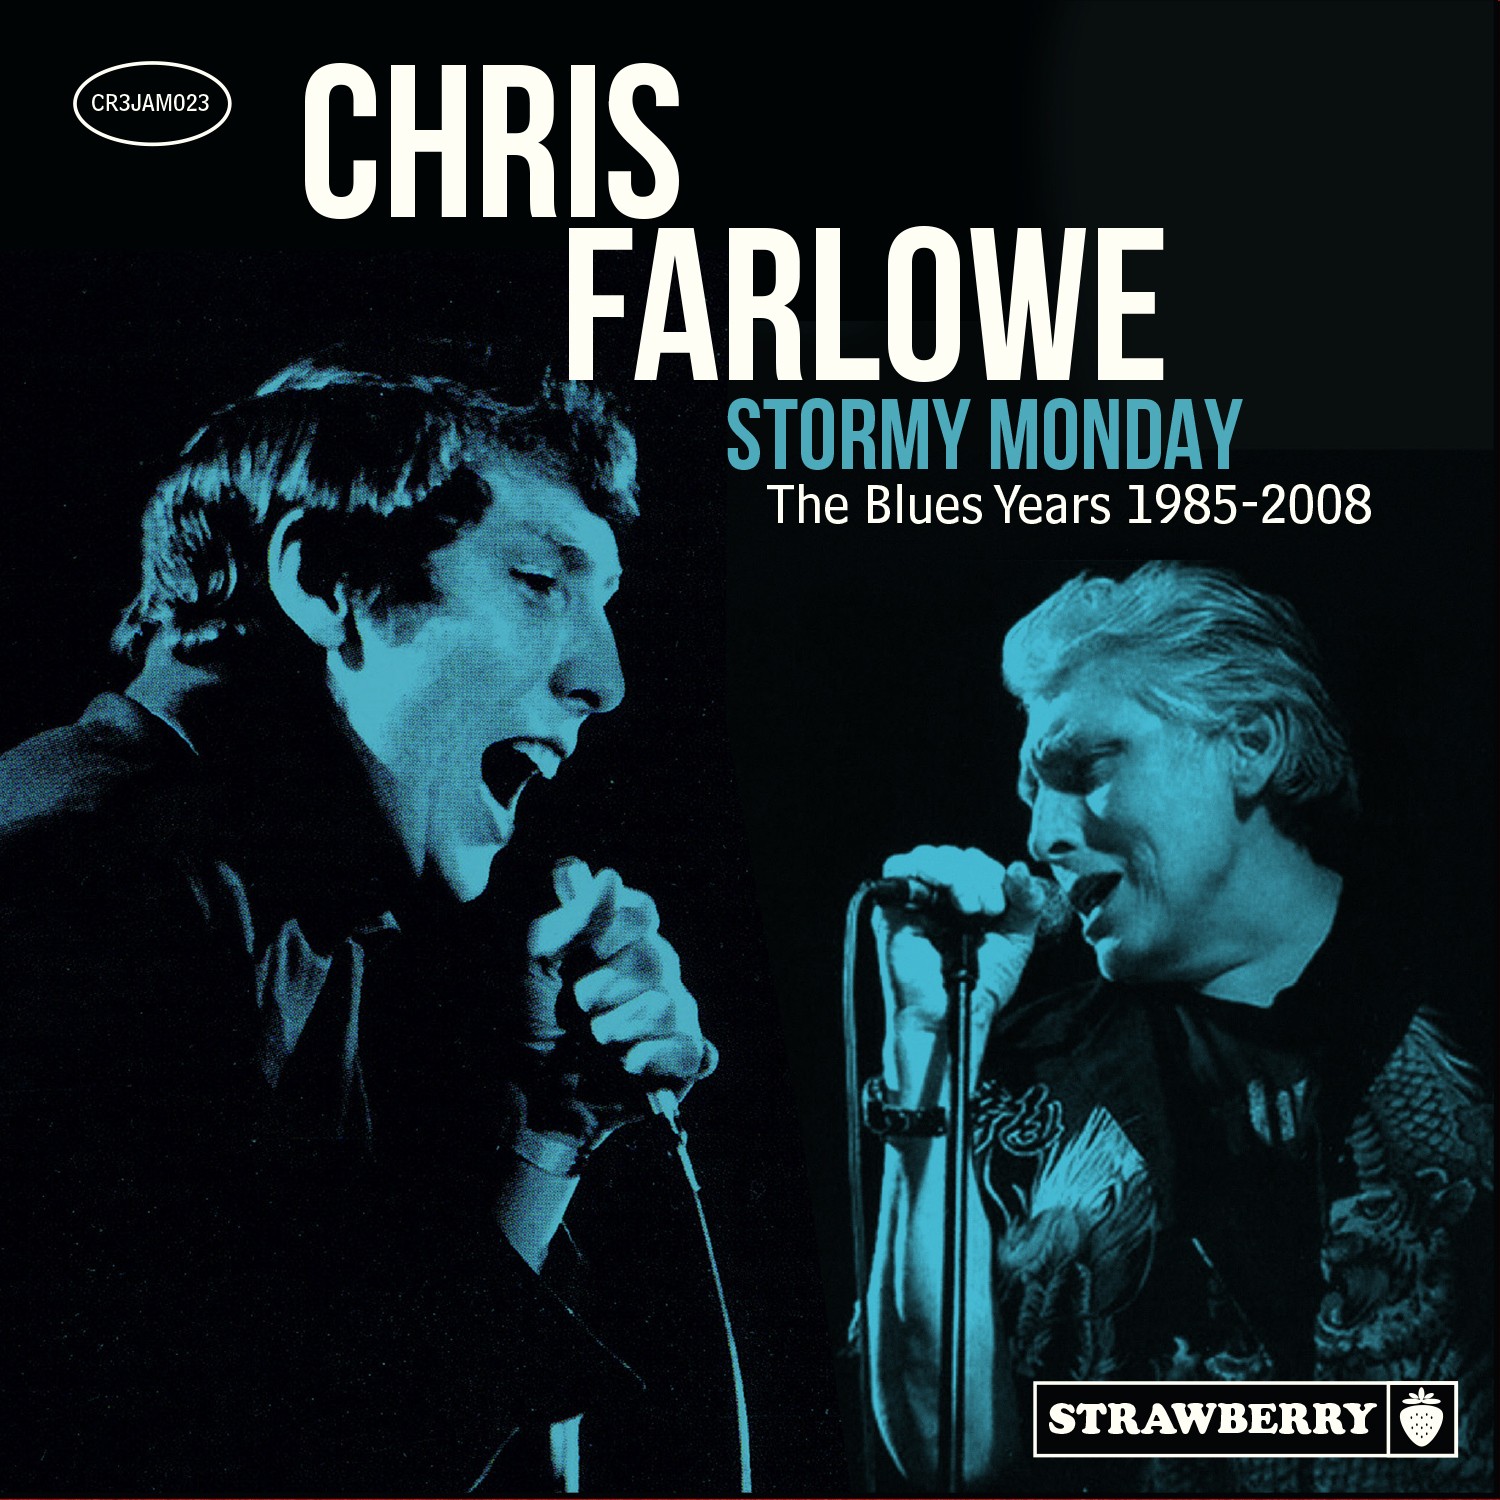 Chris Farlowe – Stormy Monday - The Blues Years 1985-2008